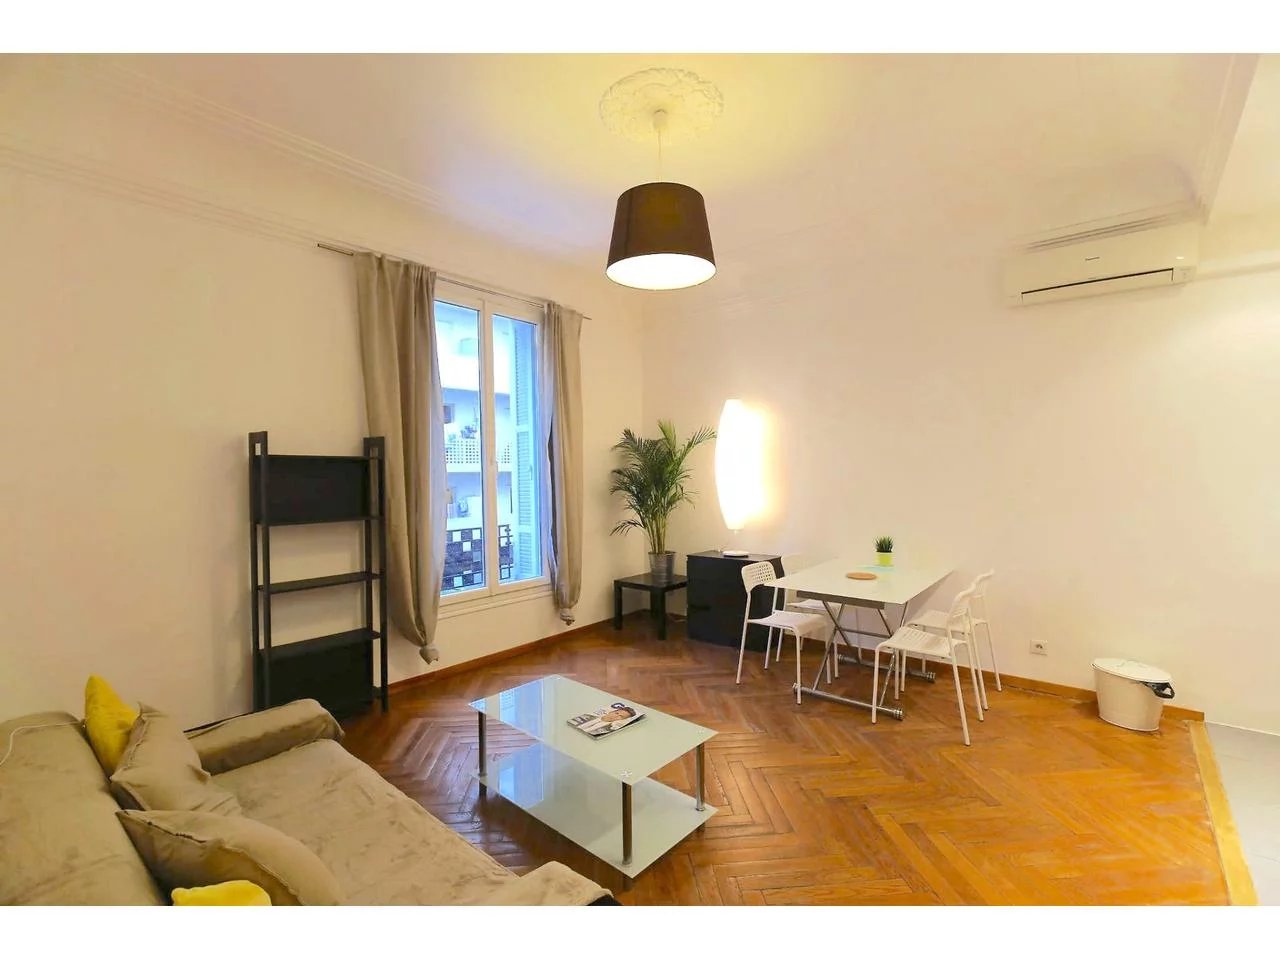 Appartement  2 Rooms 33.05m2  for sale   215 000 €